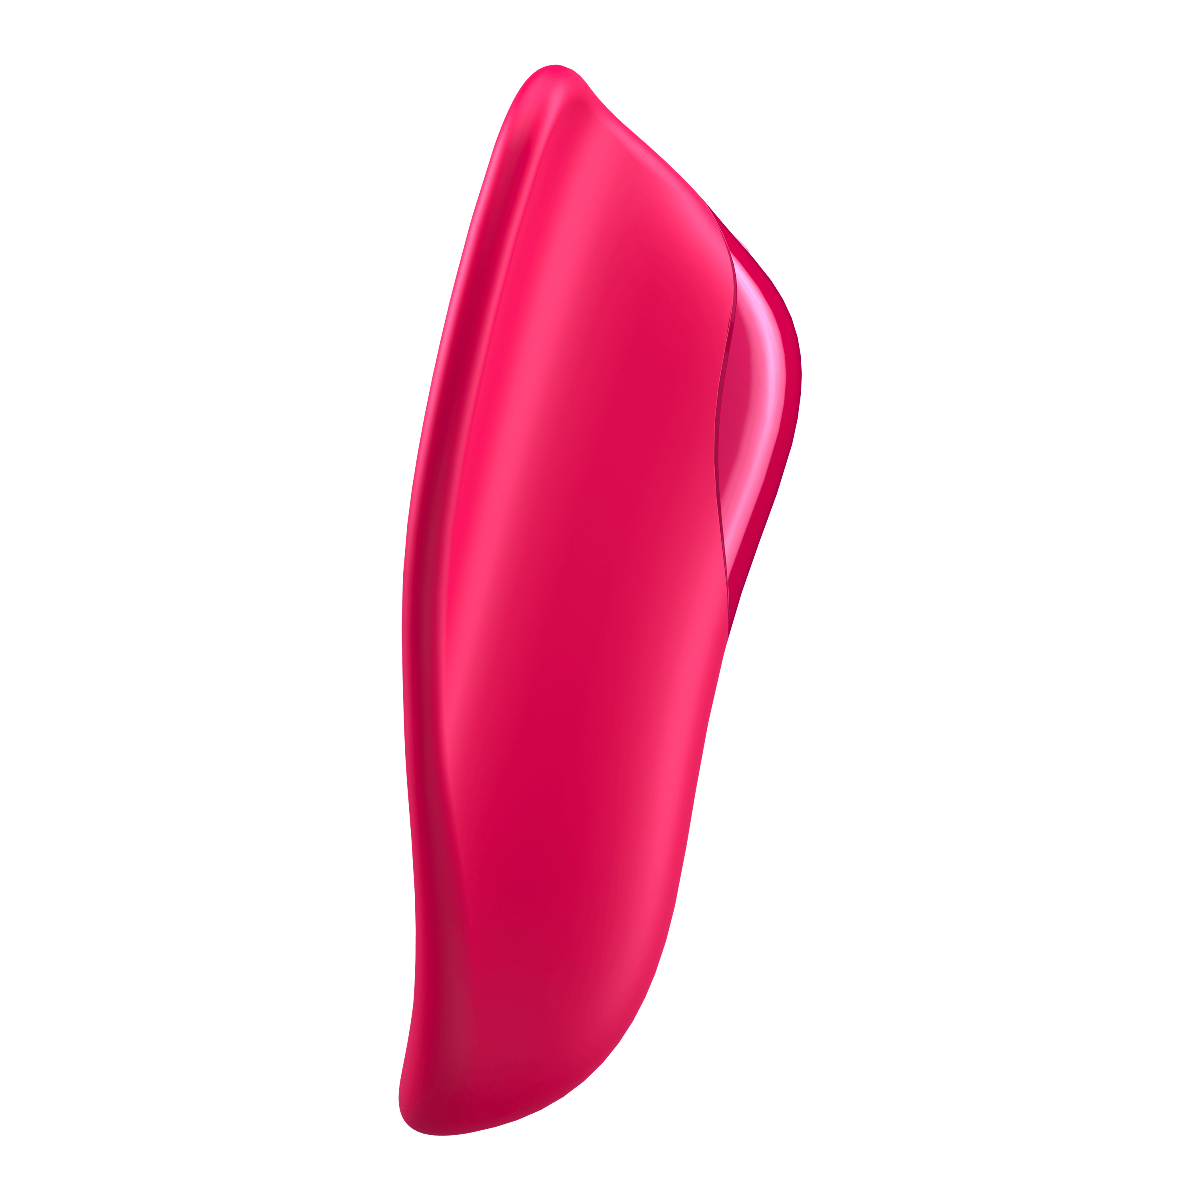 Satisfyer High Fly